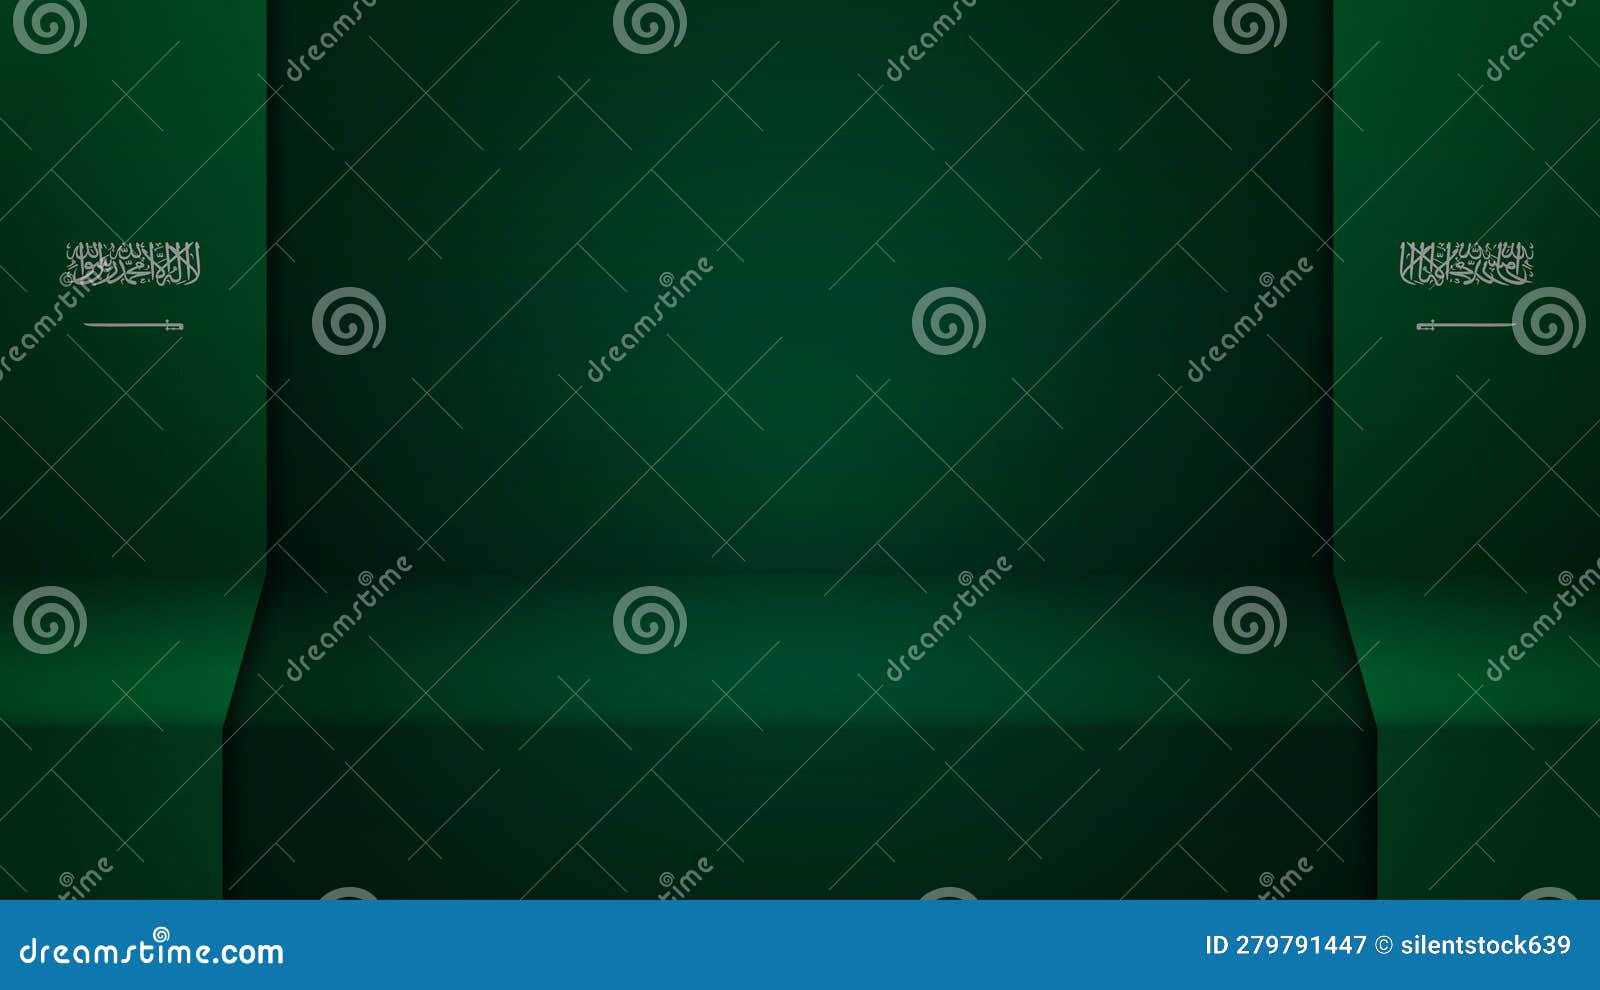 3d background with flag of saudiarabia